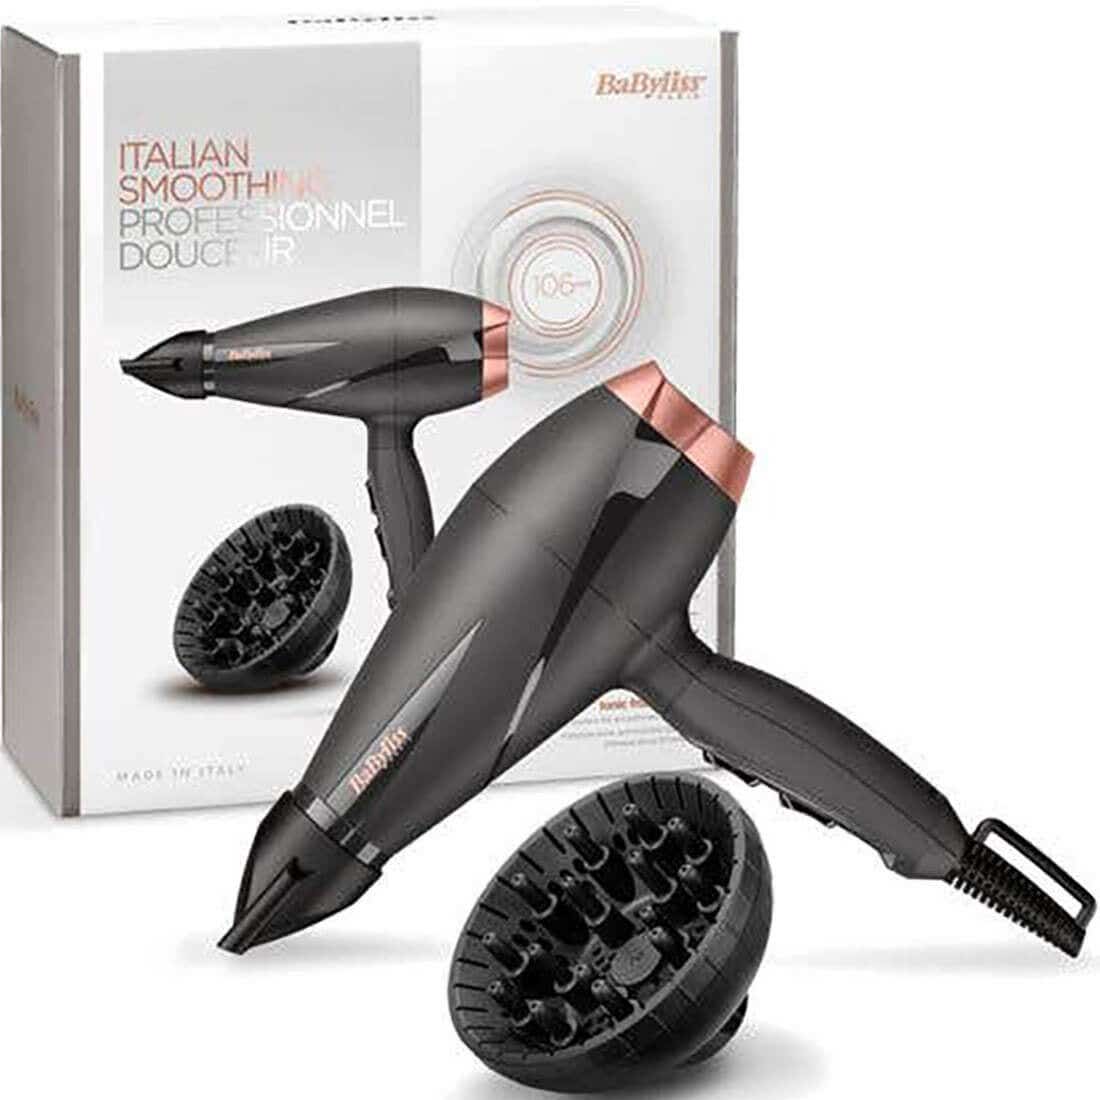 Babyliss Hair Dryer Italian With Curl Diffuser 2100w